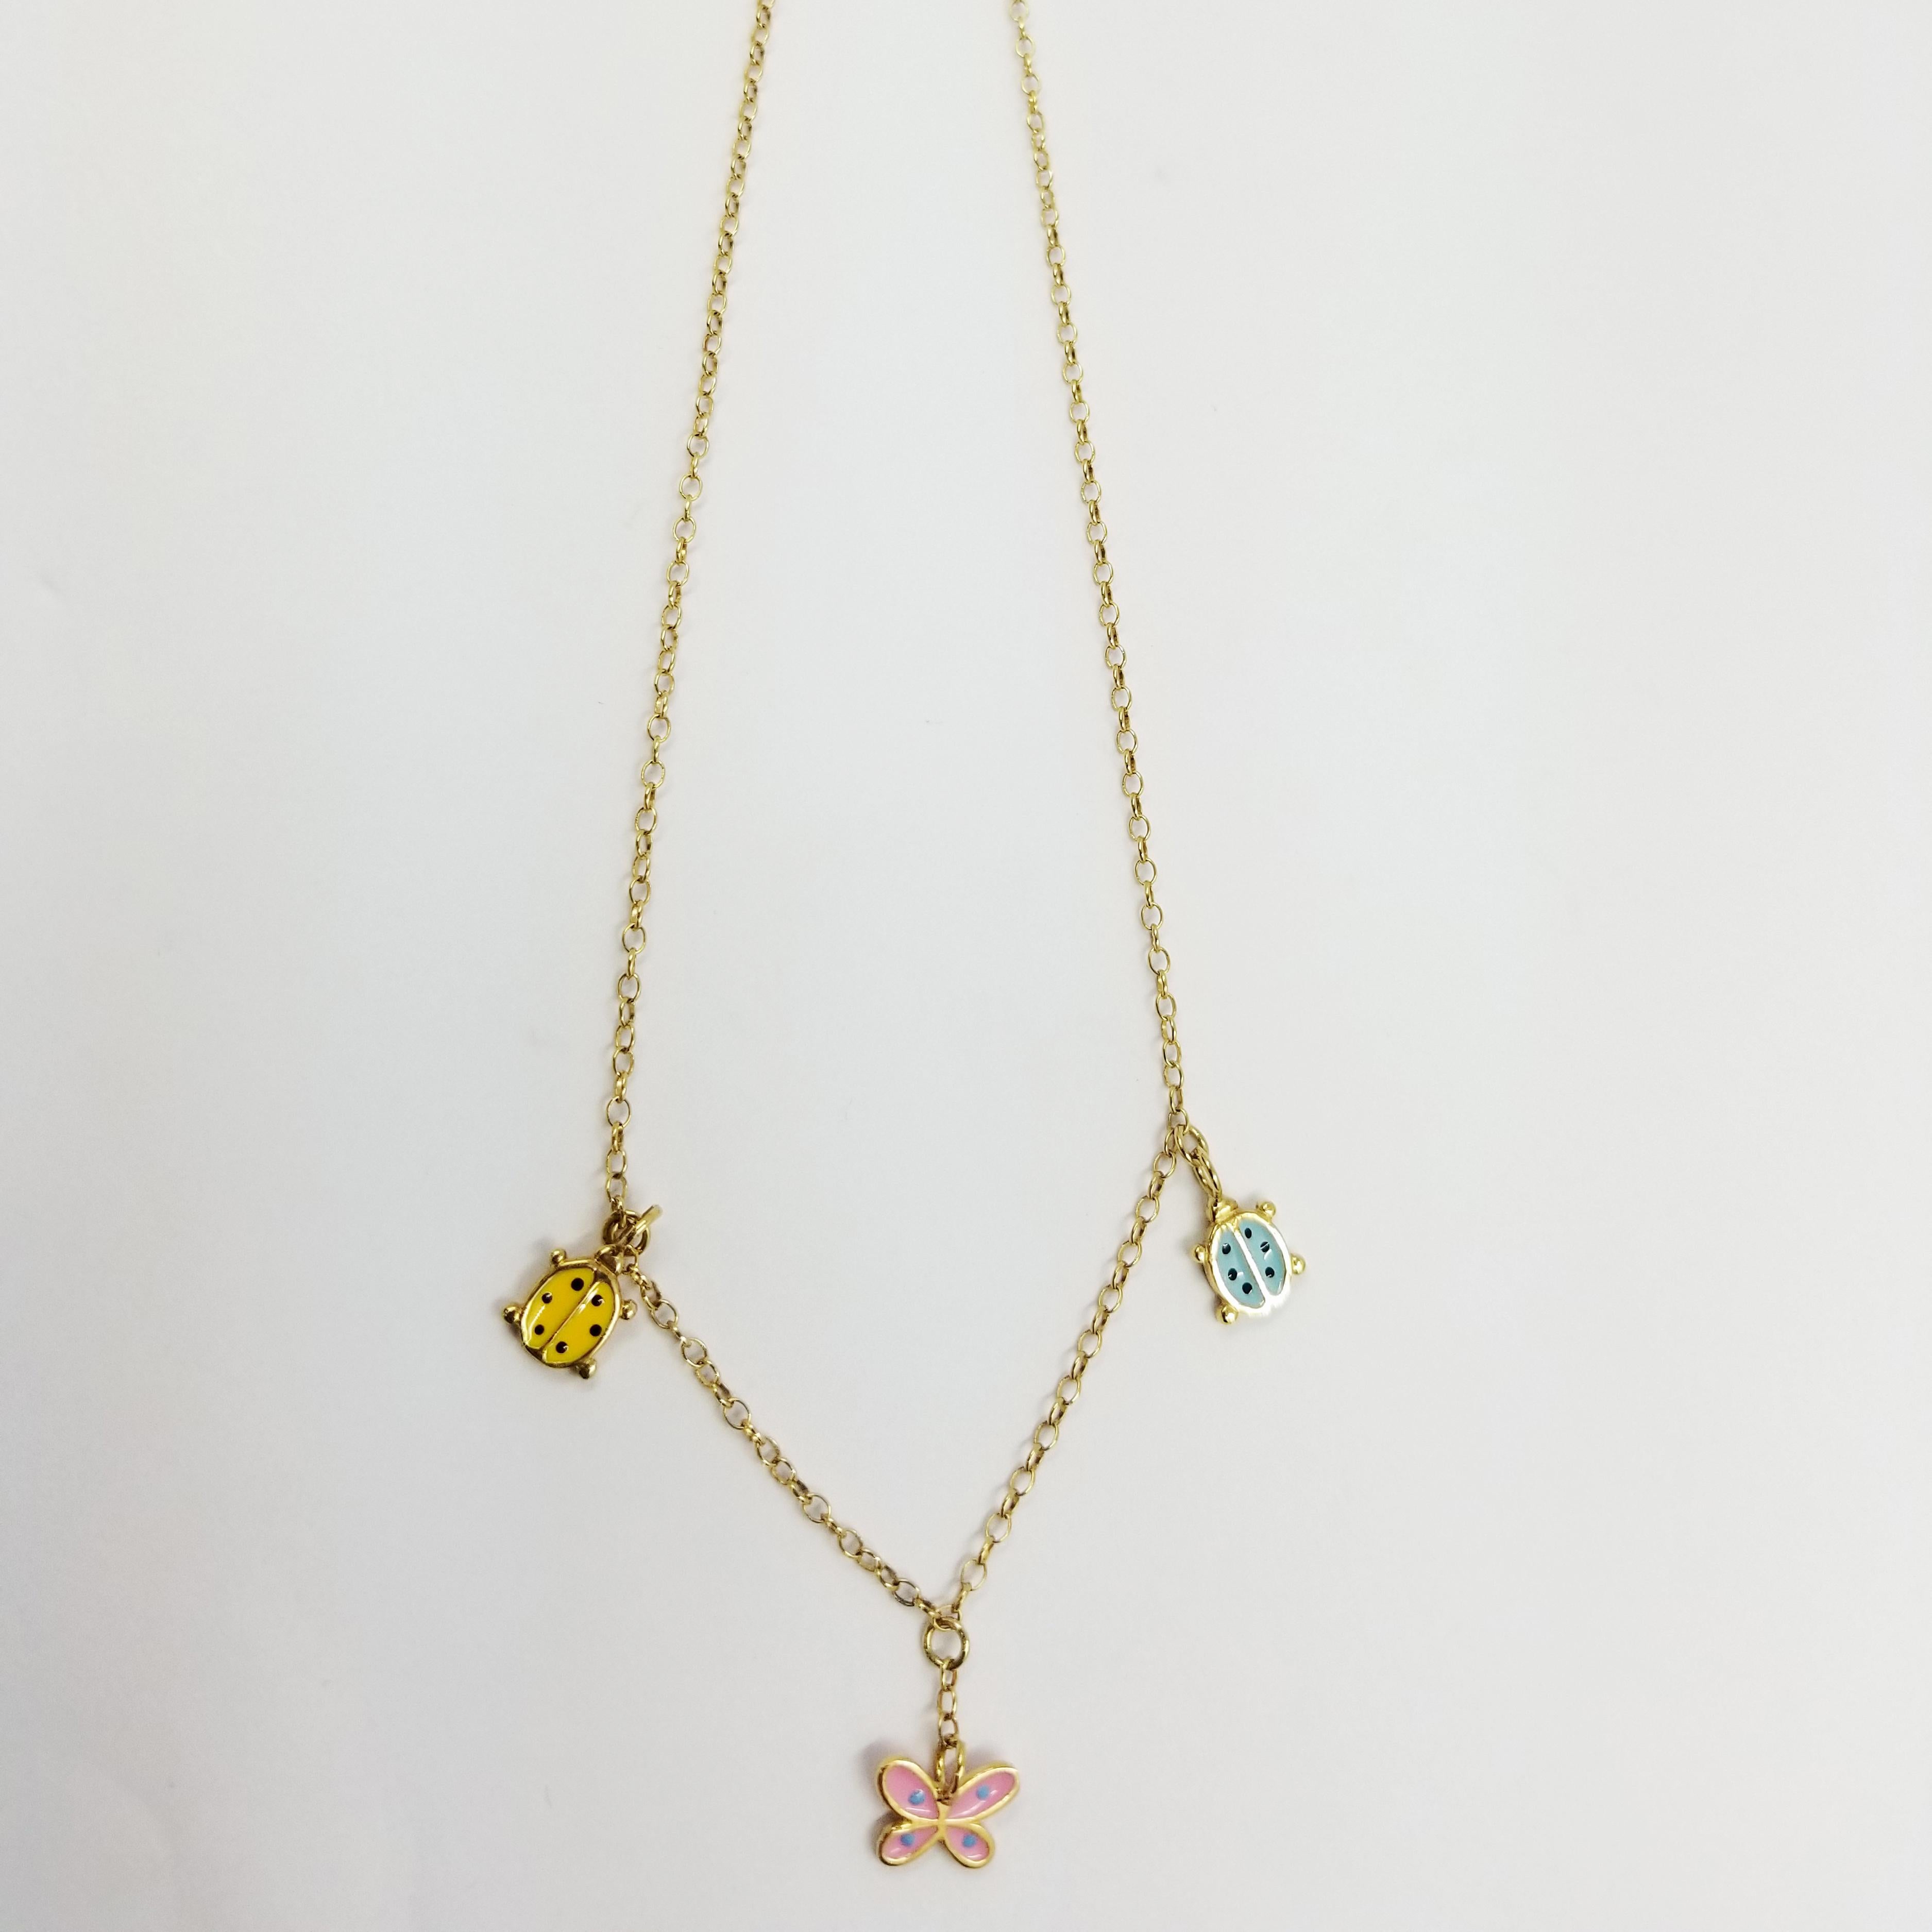 18 Karat Yellow Gold Children's Necklace Featuring Three Enamel Pendants. One Pink Butterfly, One Yellow Lady Bug, and One Blue Lady Bug Drop From The Center. Length is 14 Inches with Lobster Clasp (Kid or Baby Length).